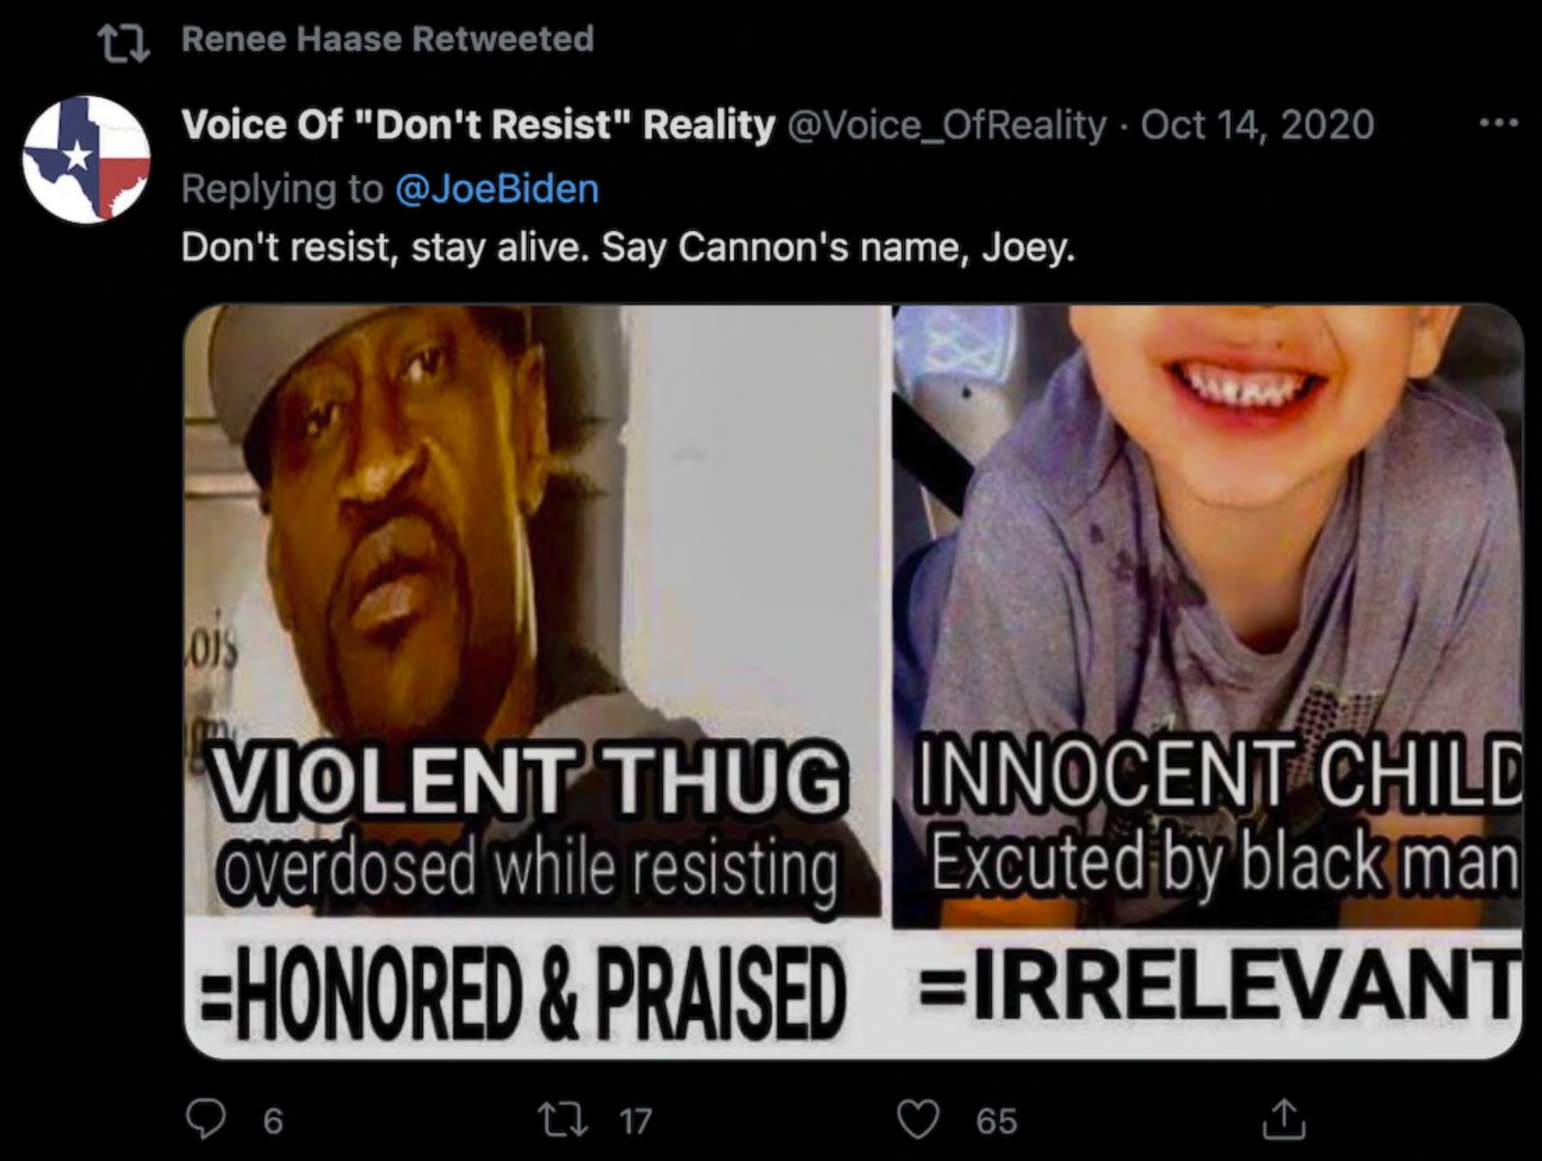 A screenshot of a controversial tweet containing two juxtaposed images with superimposed text. On the left, an image of murder victim George Floyd labeled as "VIOLENT THUG" with text accusing him of being honored despite alleged wrongdoing. On the right, an image of a smiling young child described as an "INNOCENT CHILD" with text claiming the child's death is ignored. The tweet is part of a discussion on societal reactions to different events, intending to highlight perceived media bias.